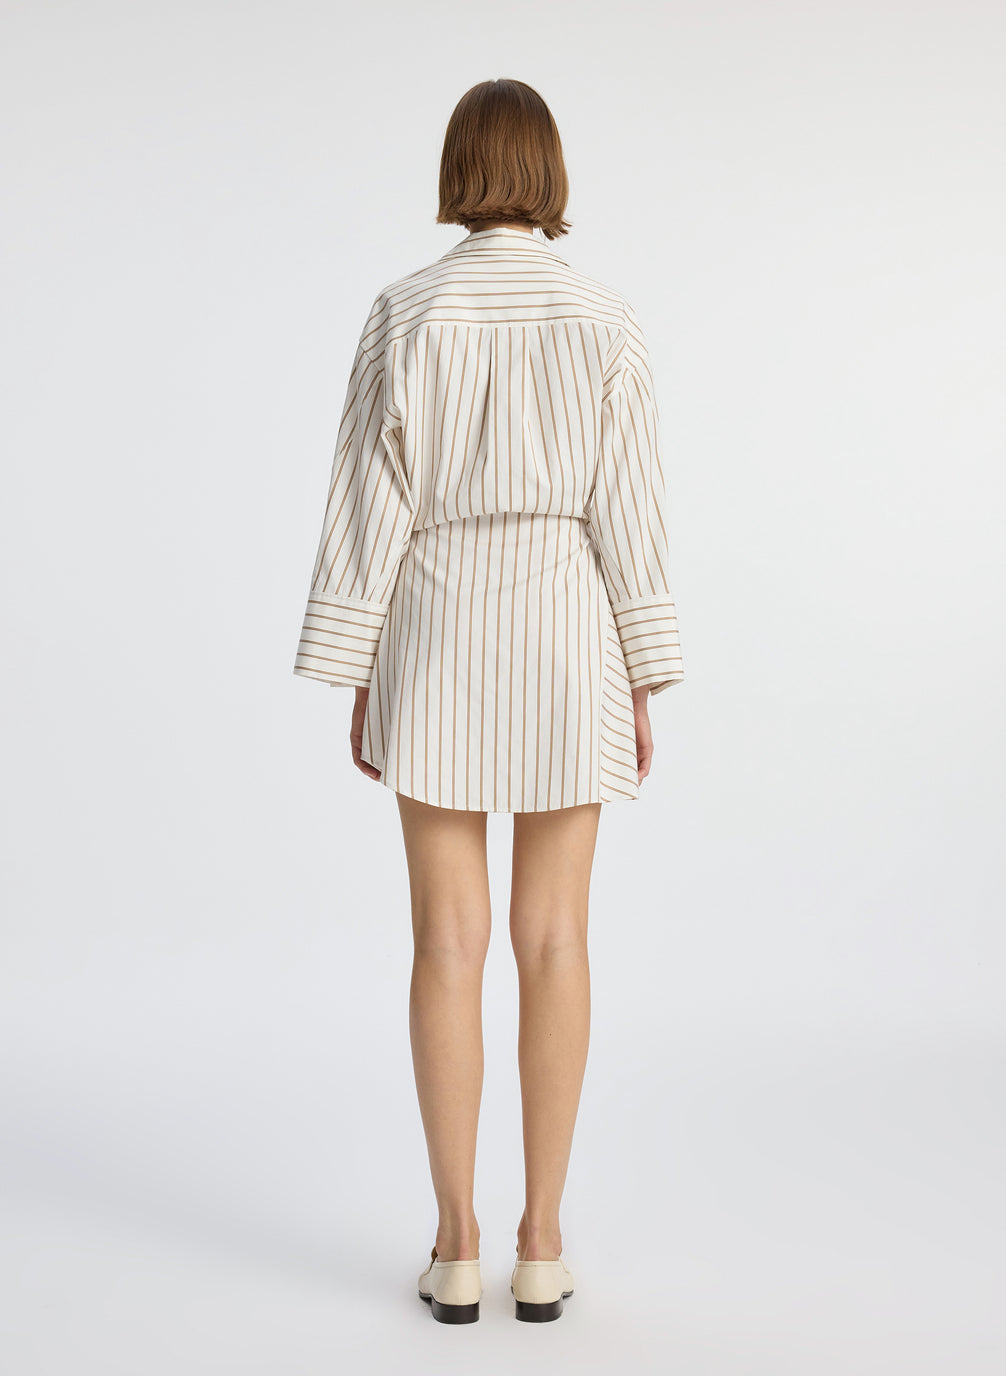 back view of woman wearing cream and brown striped wrapped shirtdress